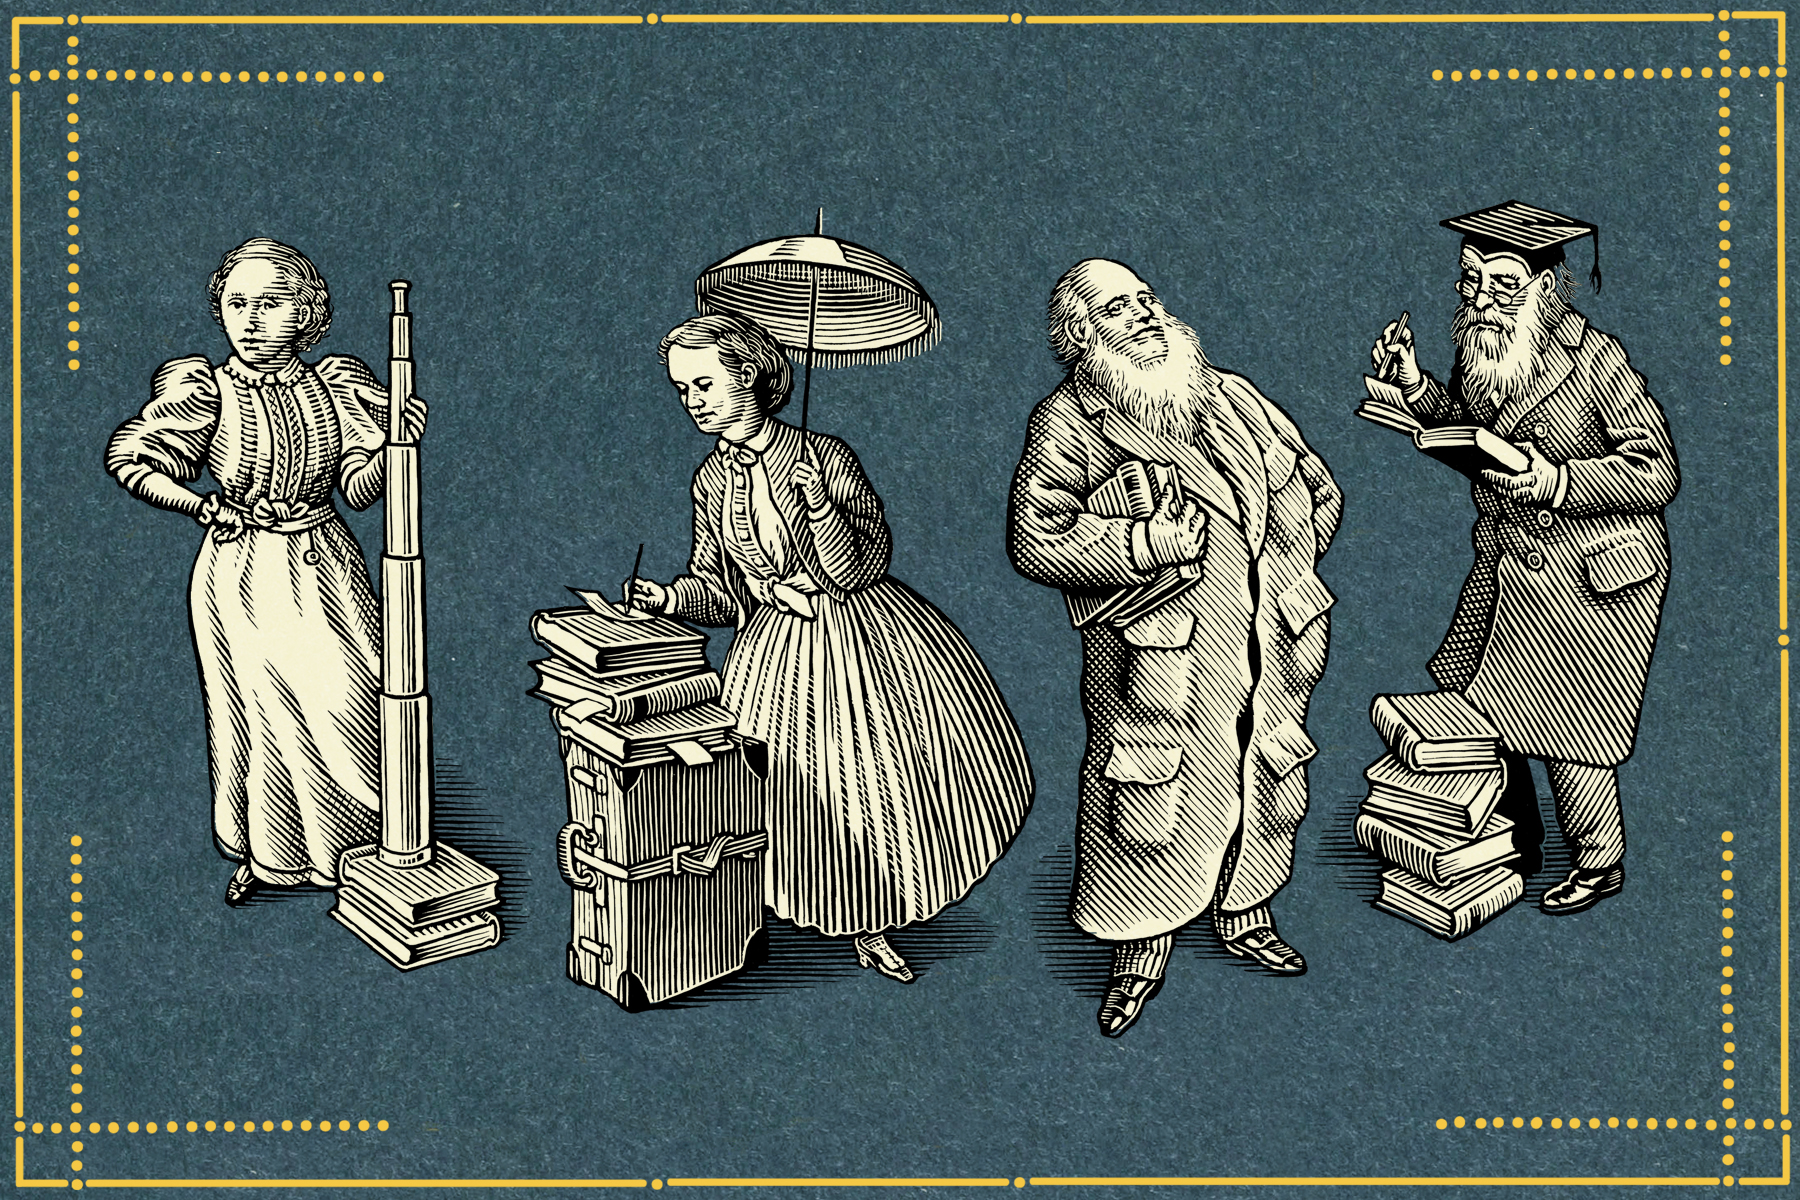 Black-and-white illustrations of four Victorian figures. From left to right: a woman holding a large telescope; a woman with an umbrella and a large stack of books; a bearded man wearing a coat with many pockets; an elderly man wearing a mortarboard hat and writing in a book